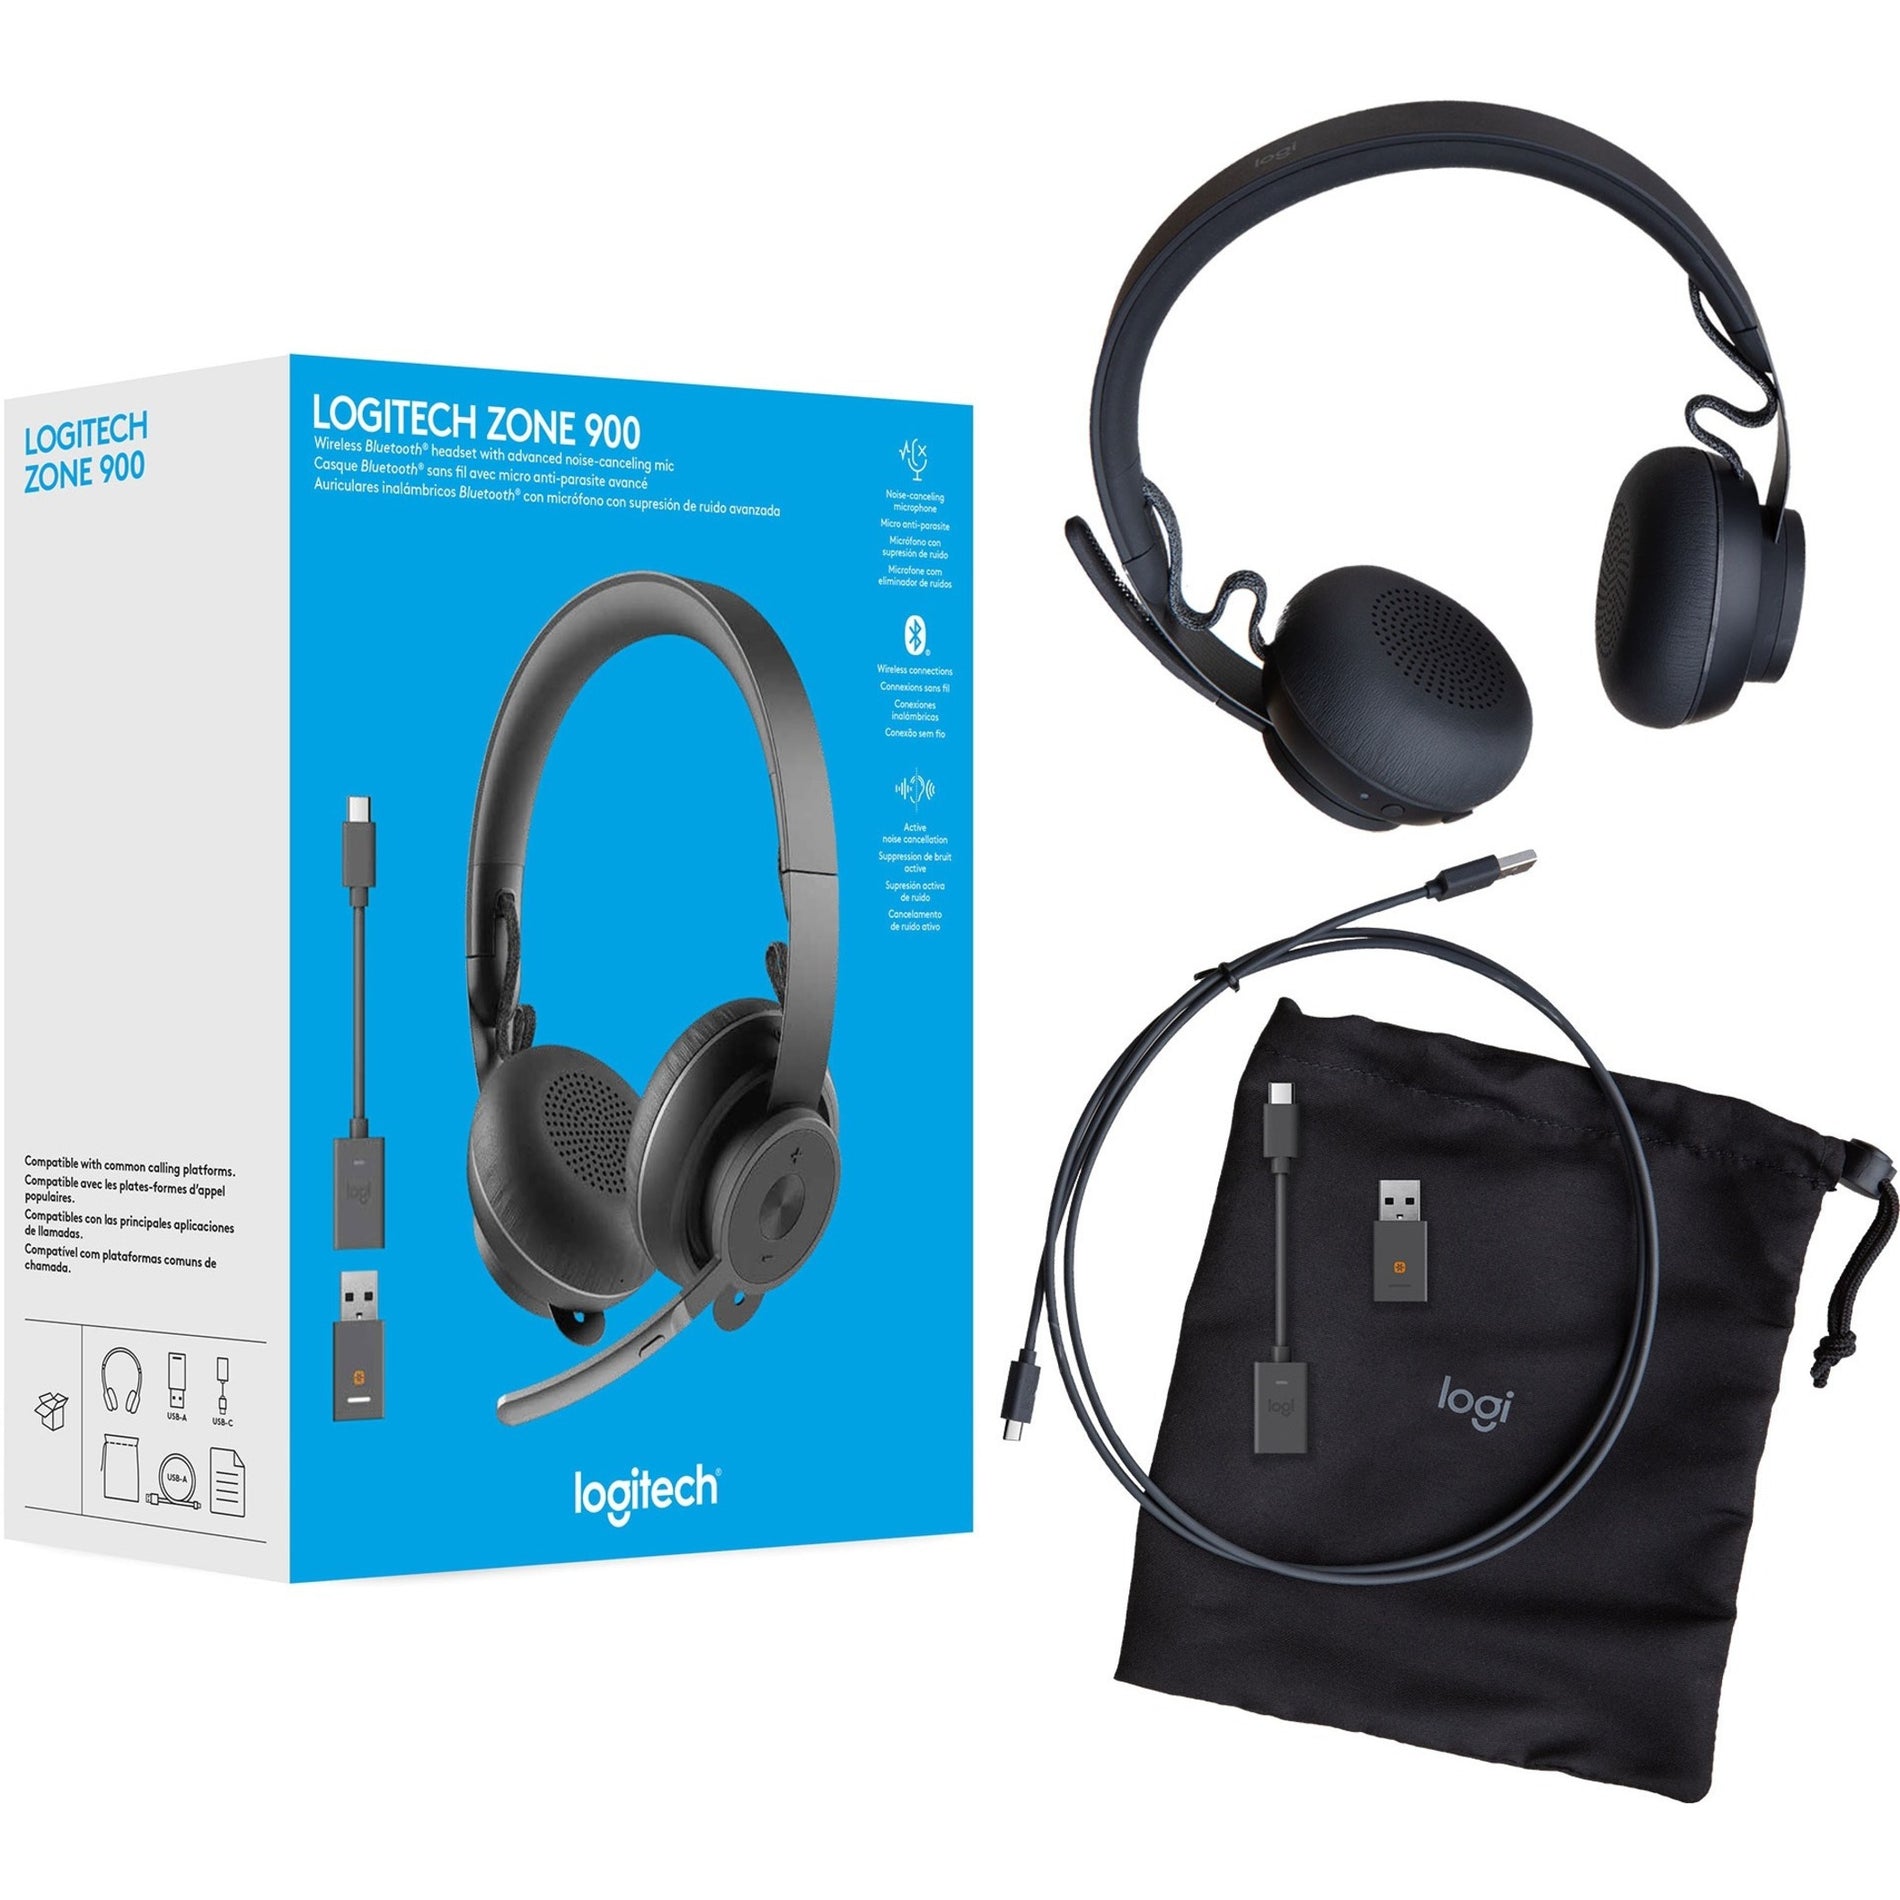 Logitech 981-001100 Zone 900 Headset Wireless Bluetooth Over-Ear Headset with Noise Canceling Graphite